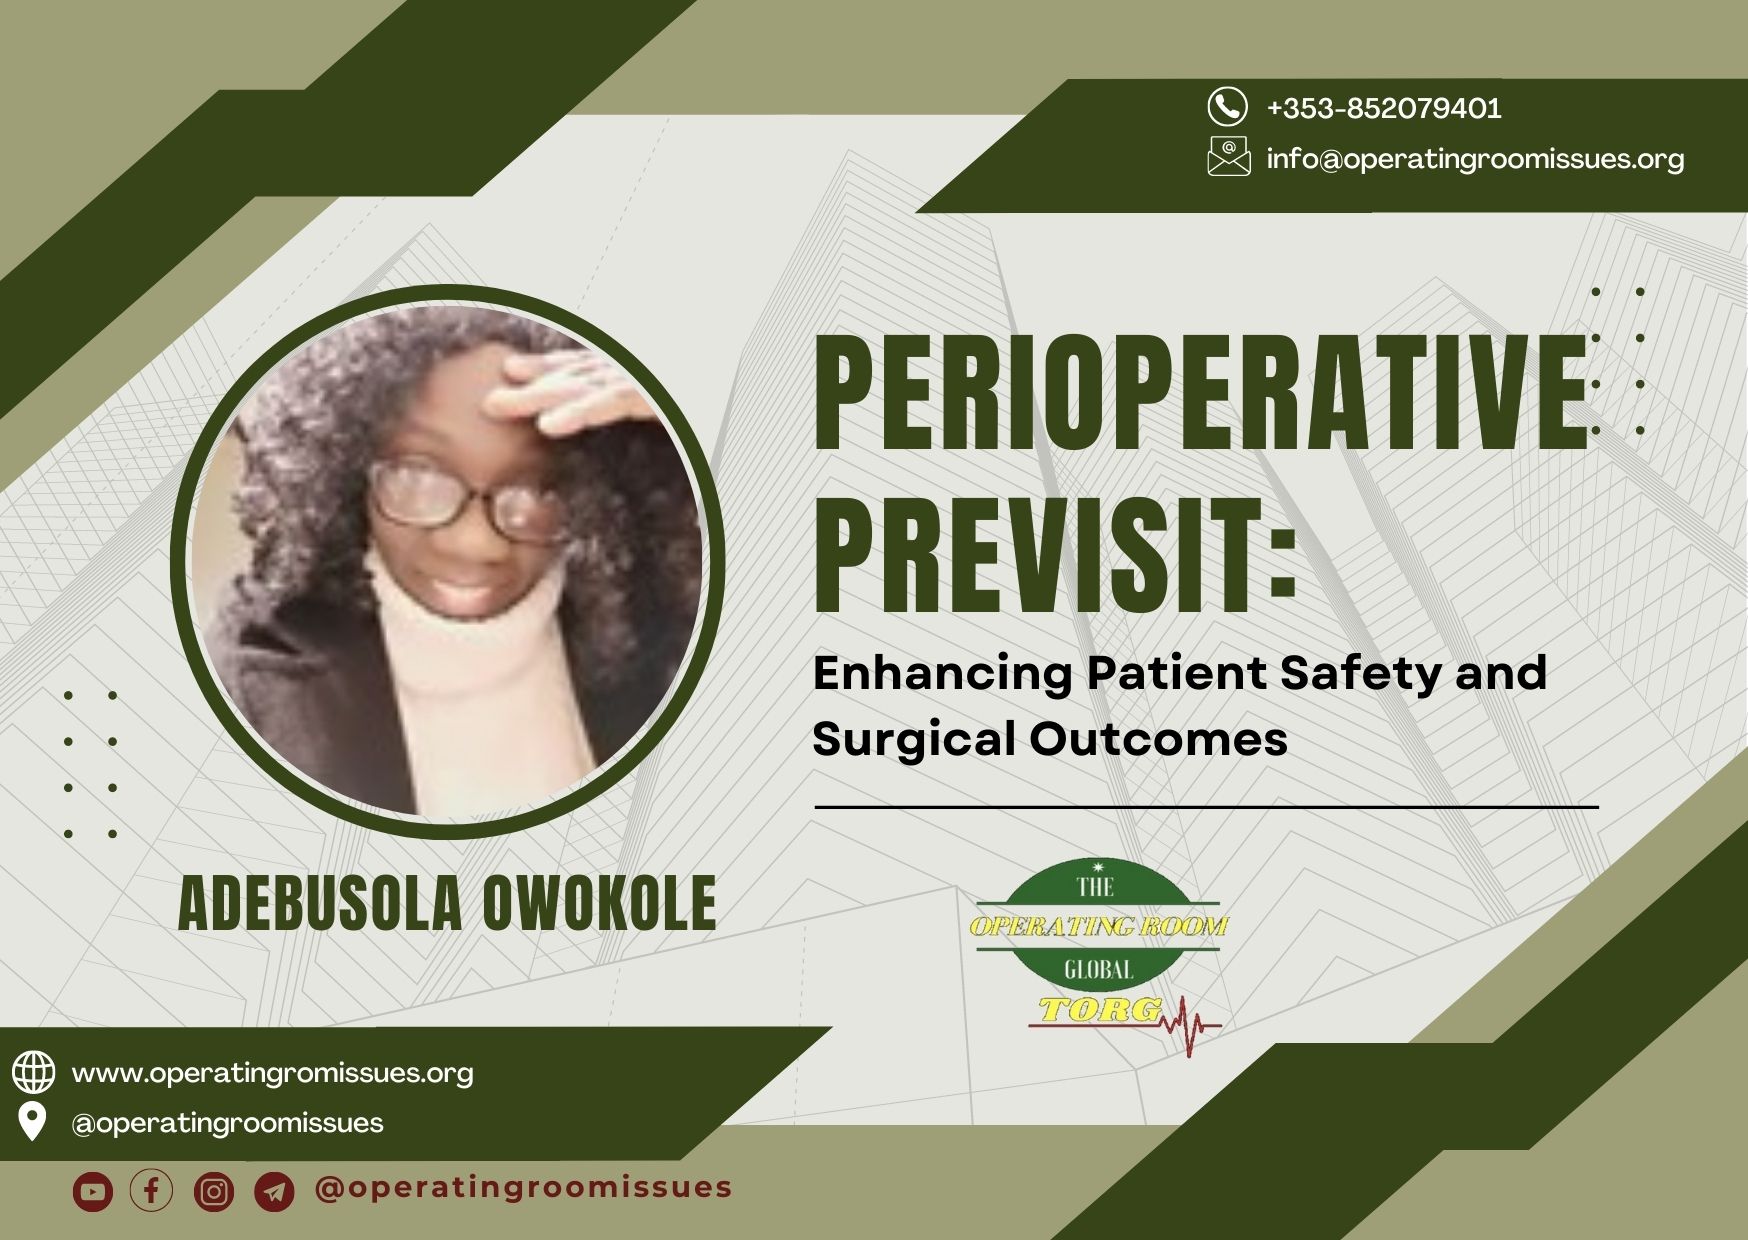 Perioperative Previsit: Enhancing Patient Safety and Surgical Outcomes